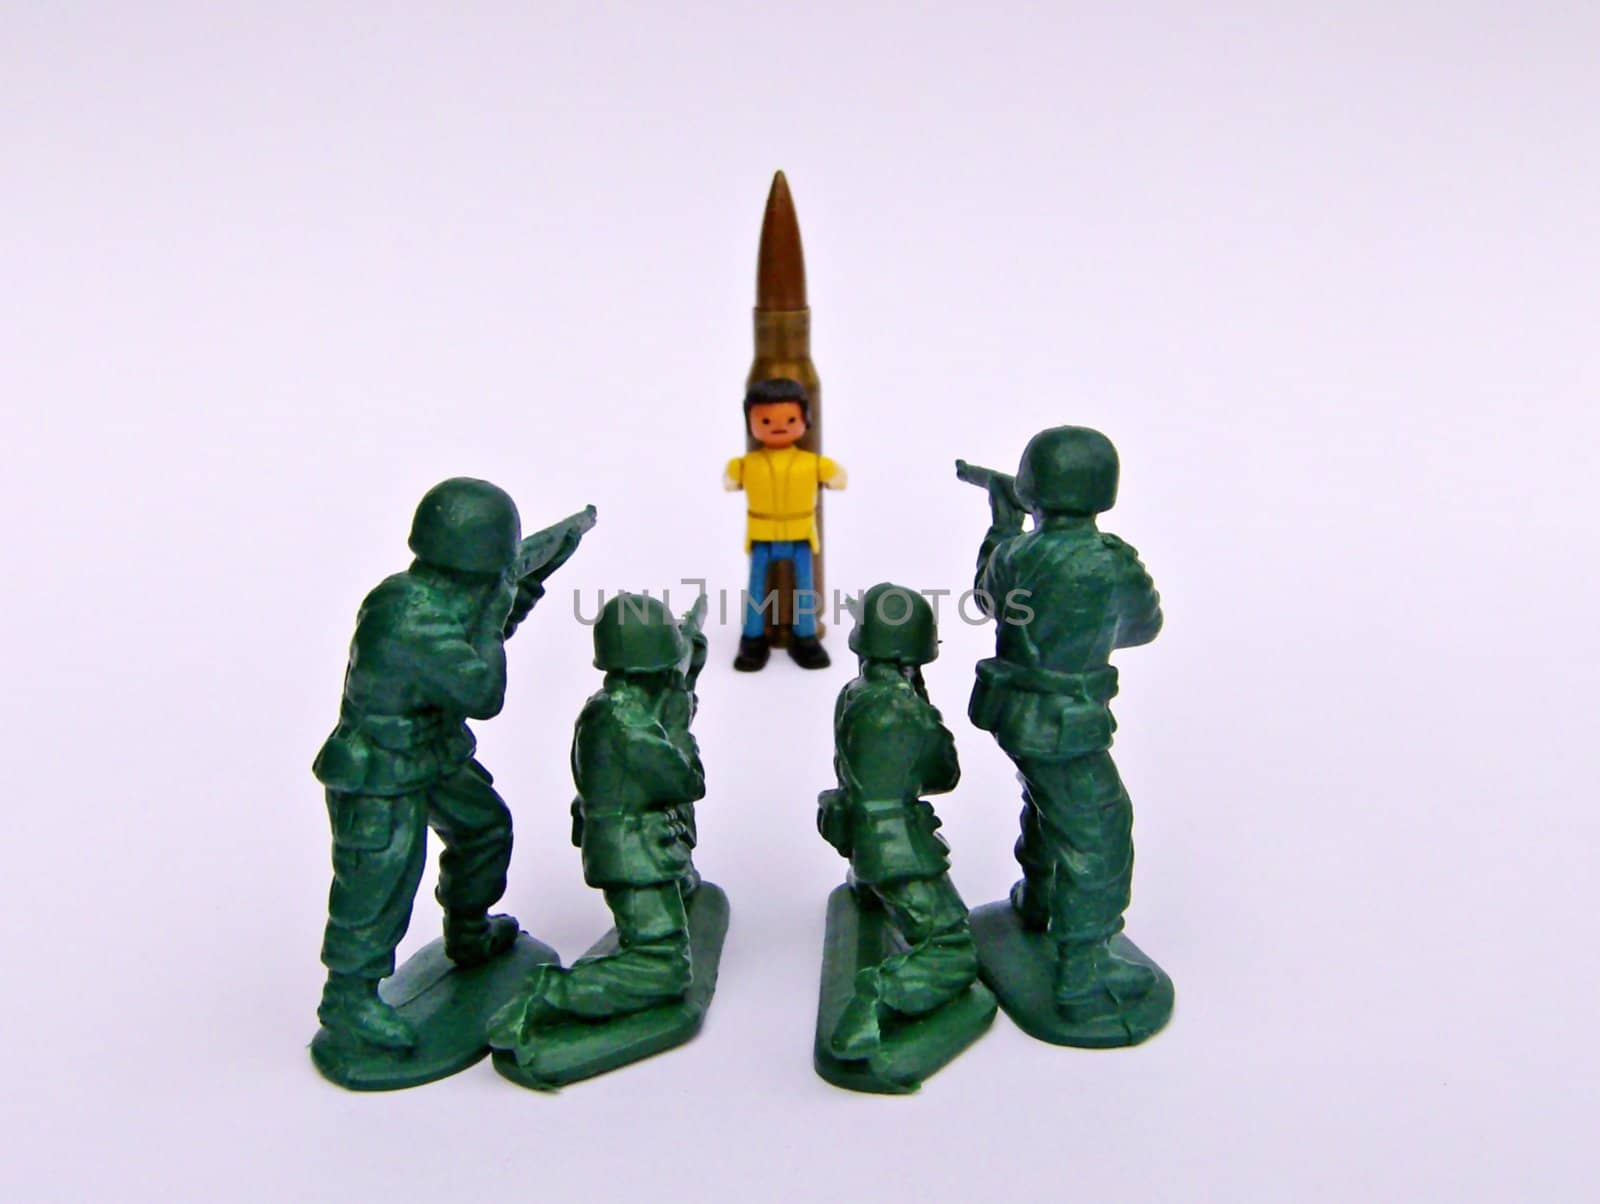 Firing squad made with toy soldiers by BrunoESantos